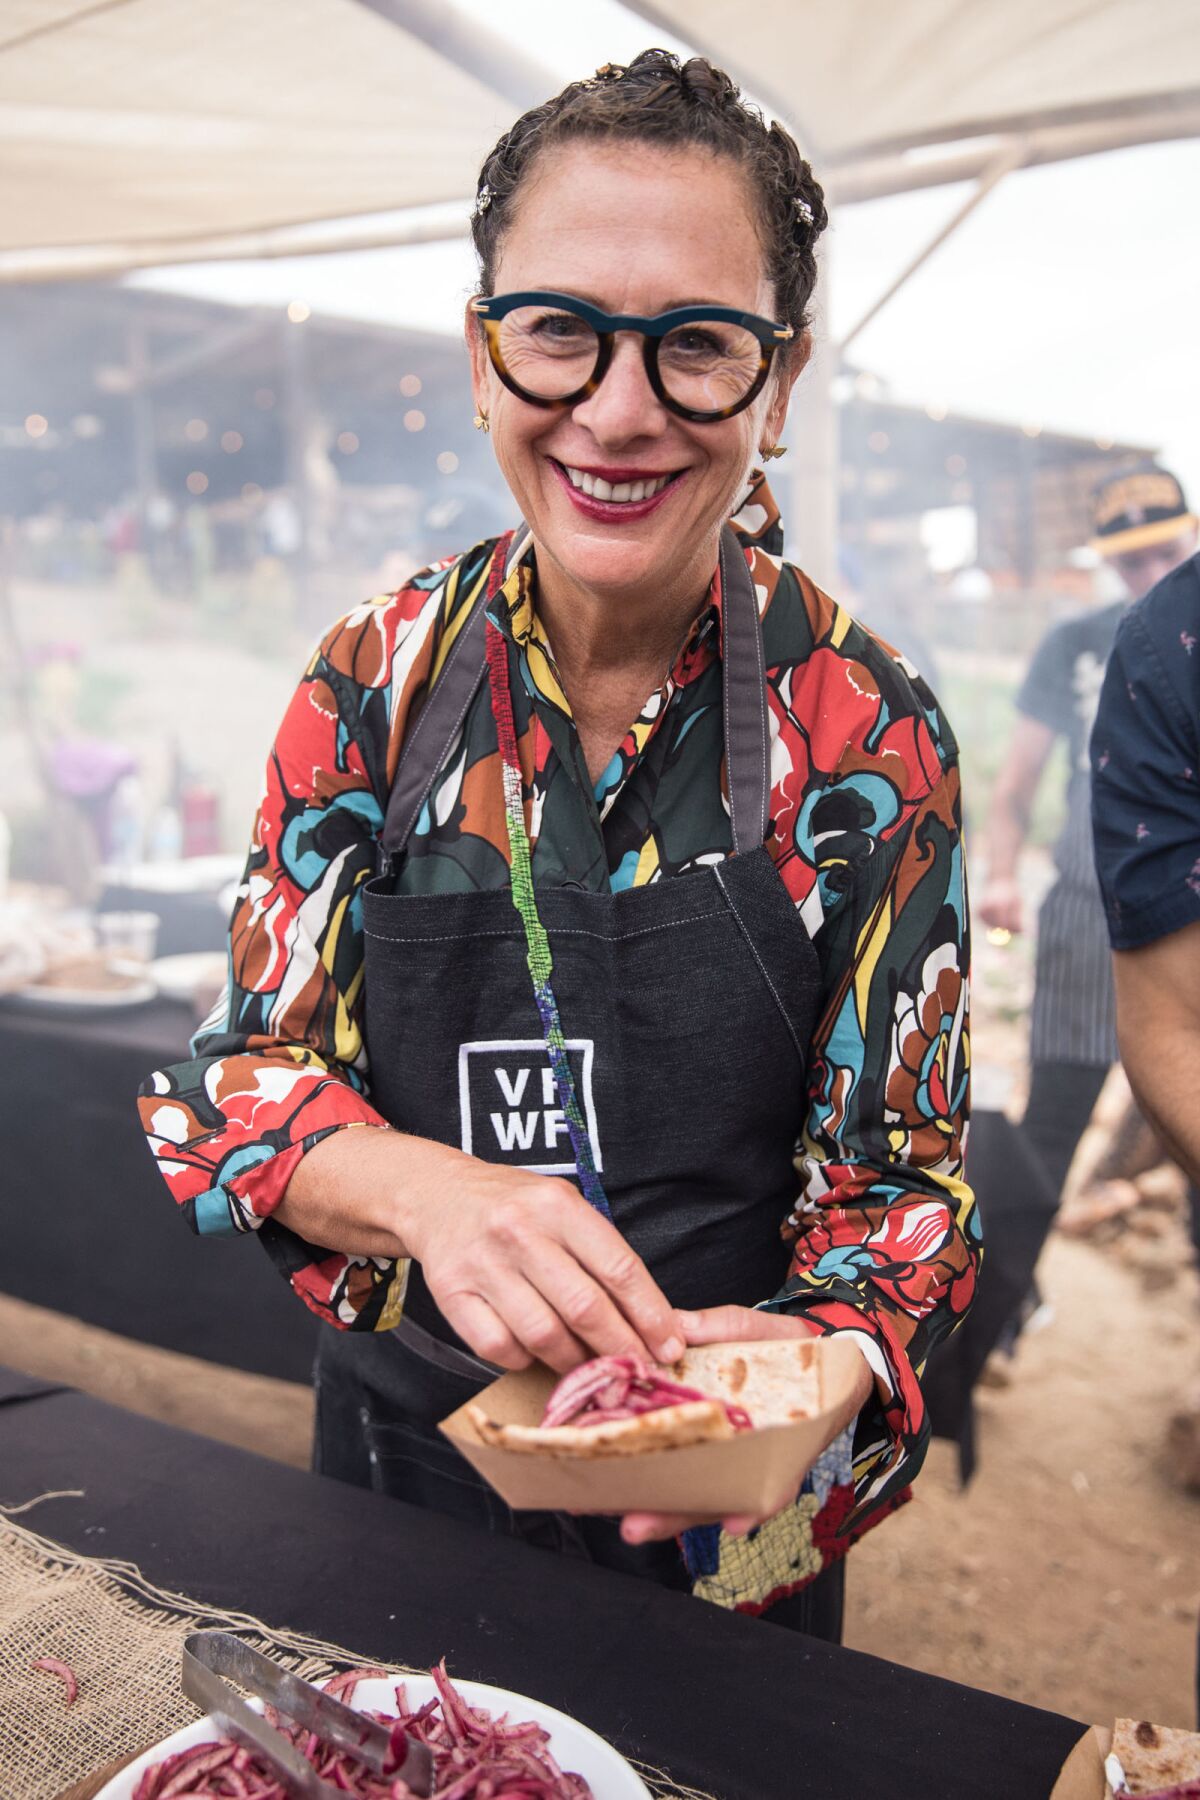 Valle Food & Wine Fest co-founder Nancy Silverton prepares a food dish for a festival-goer at the annual event in Baja's Valle de Guadalupe.